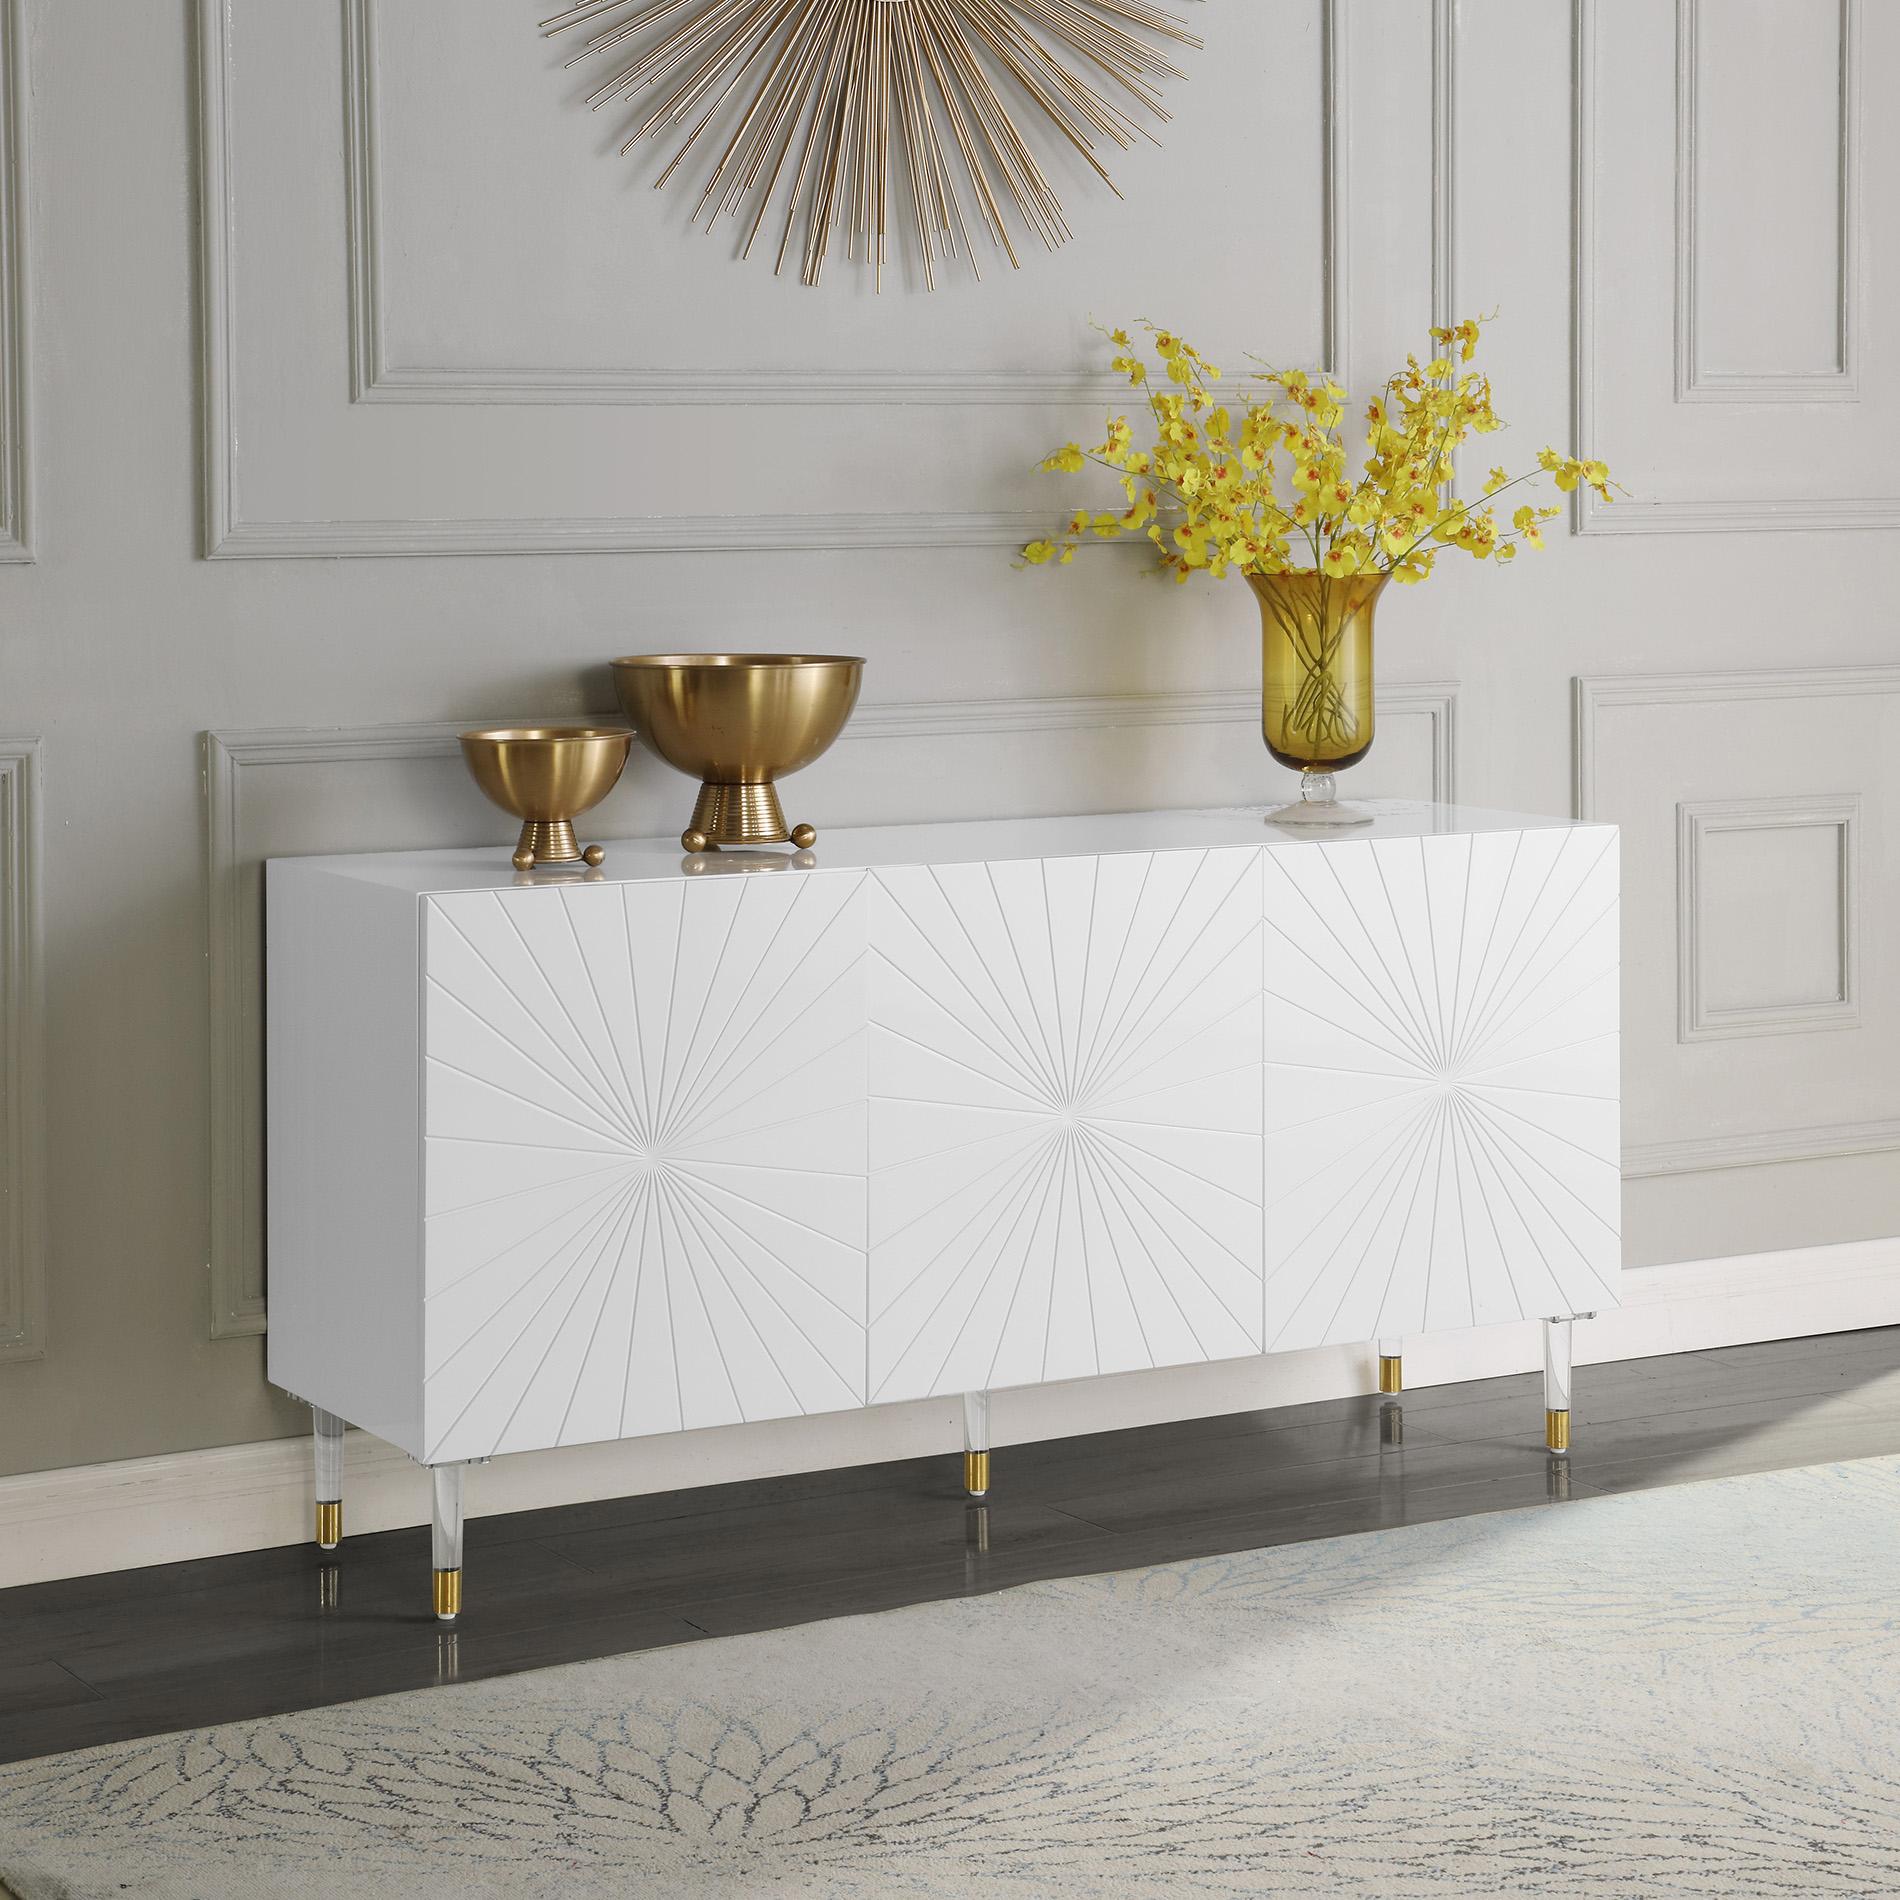 Contemporary, Modern Buffet STARBURST 316 316 in White Lacquer